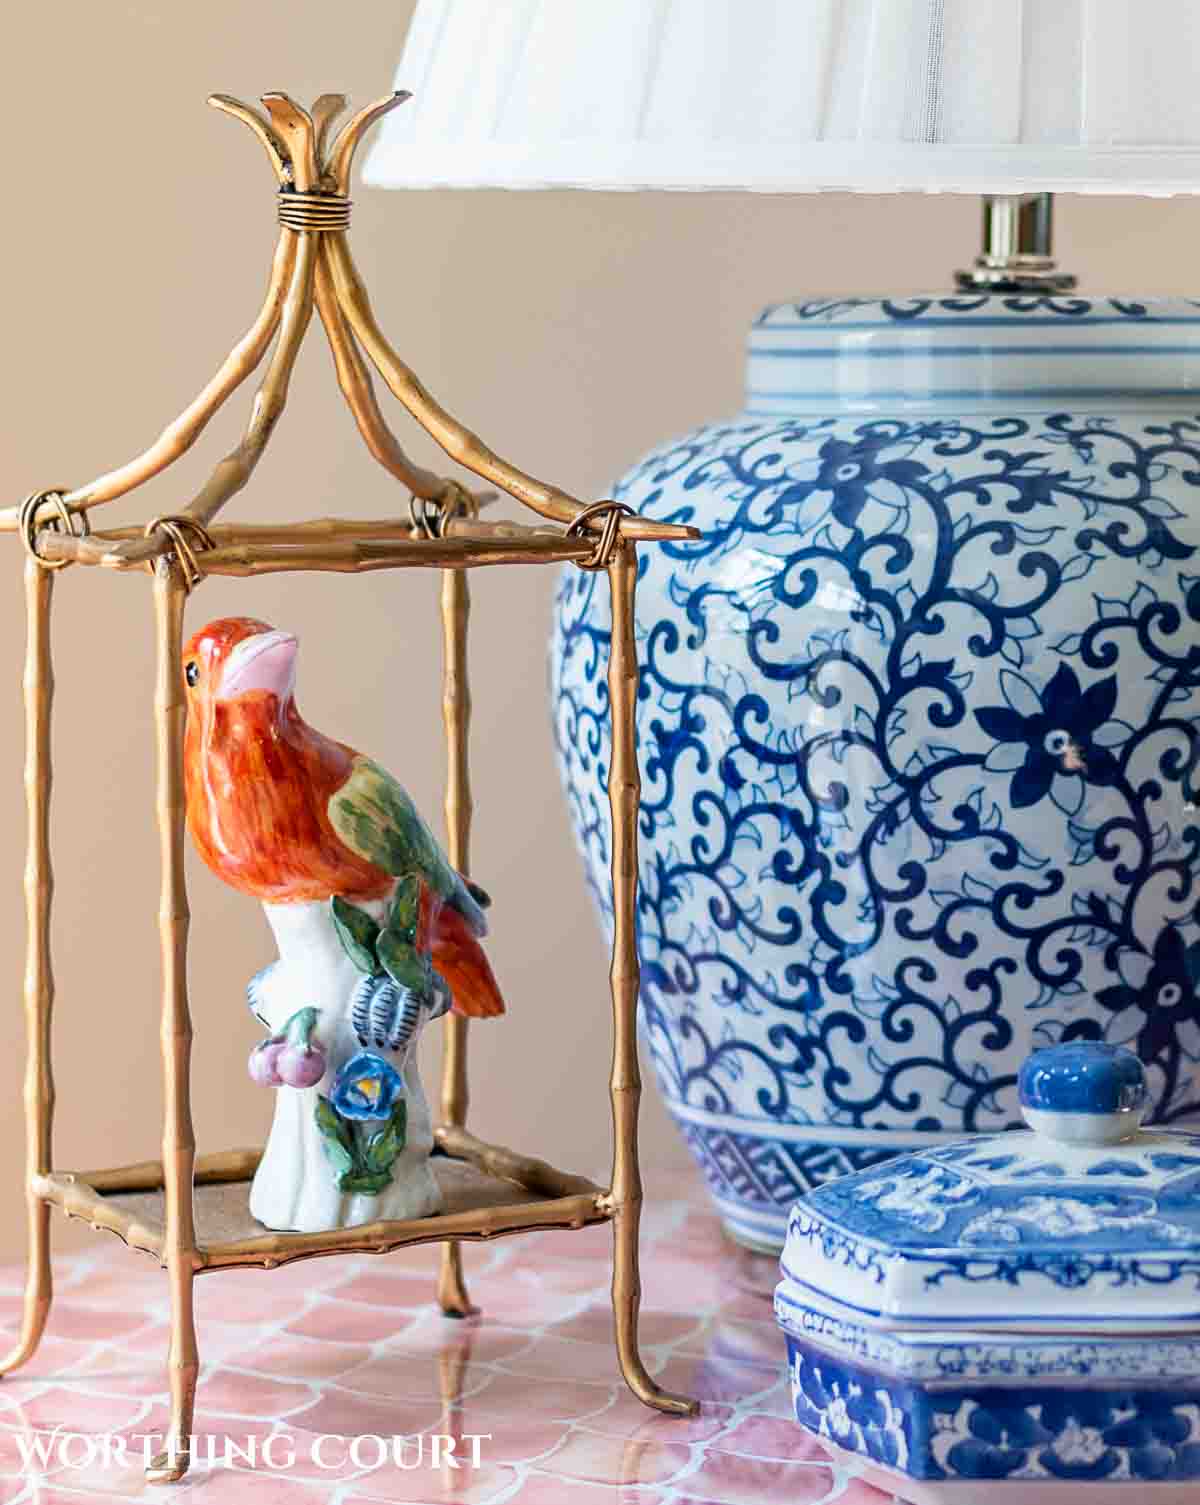 bird figurine in an open brass lantern next to a bue and white lamp